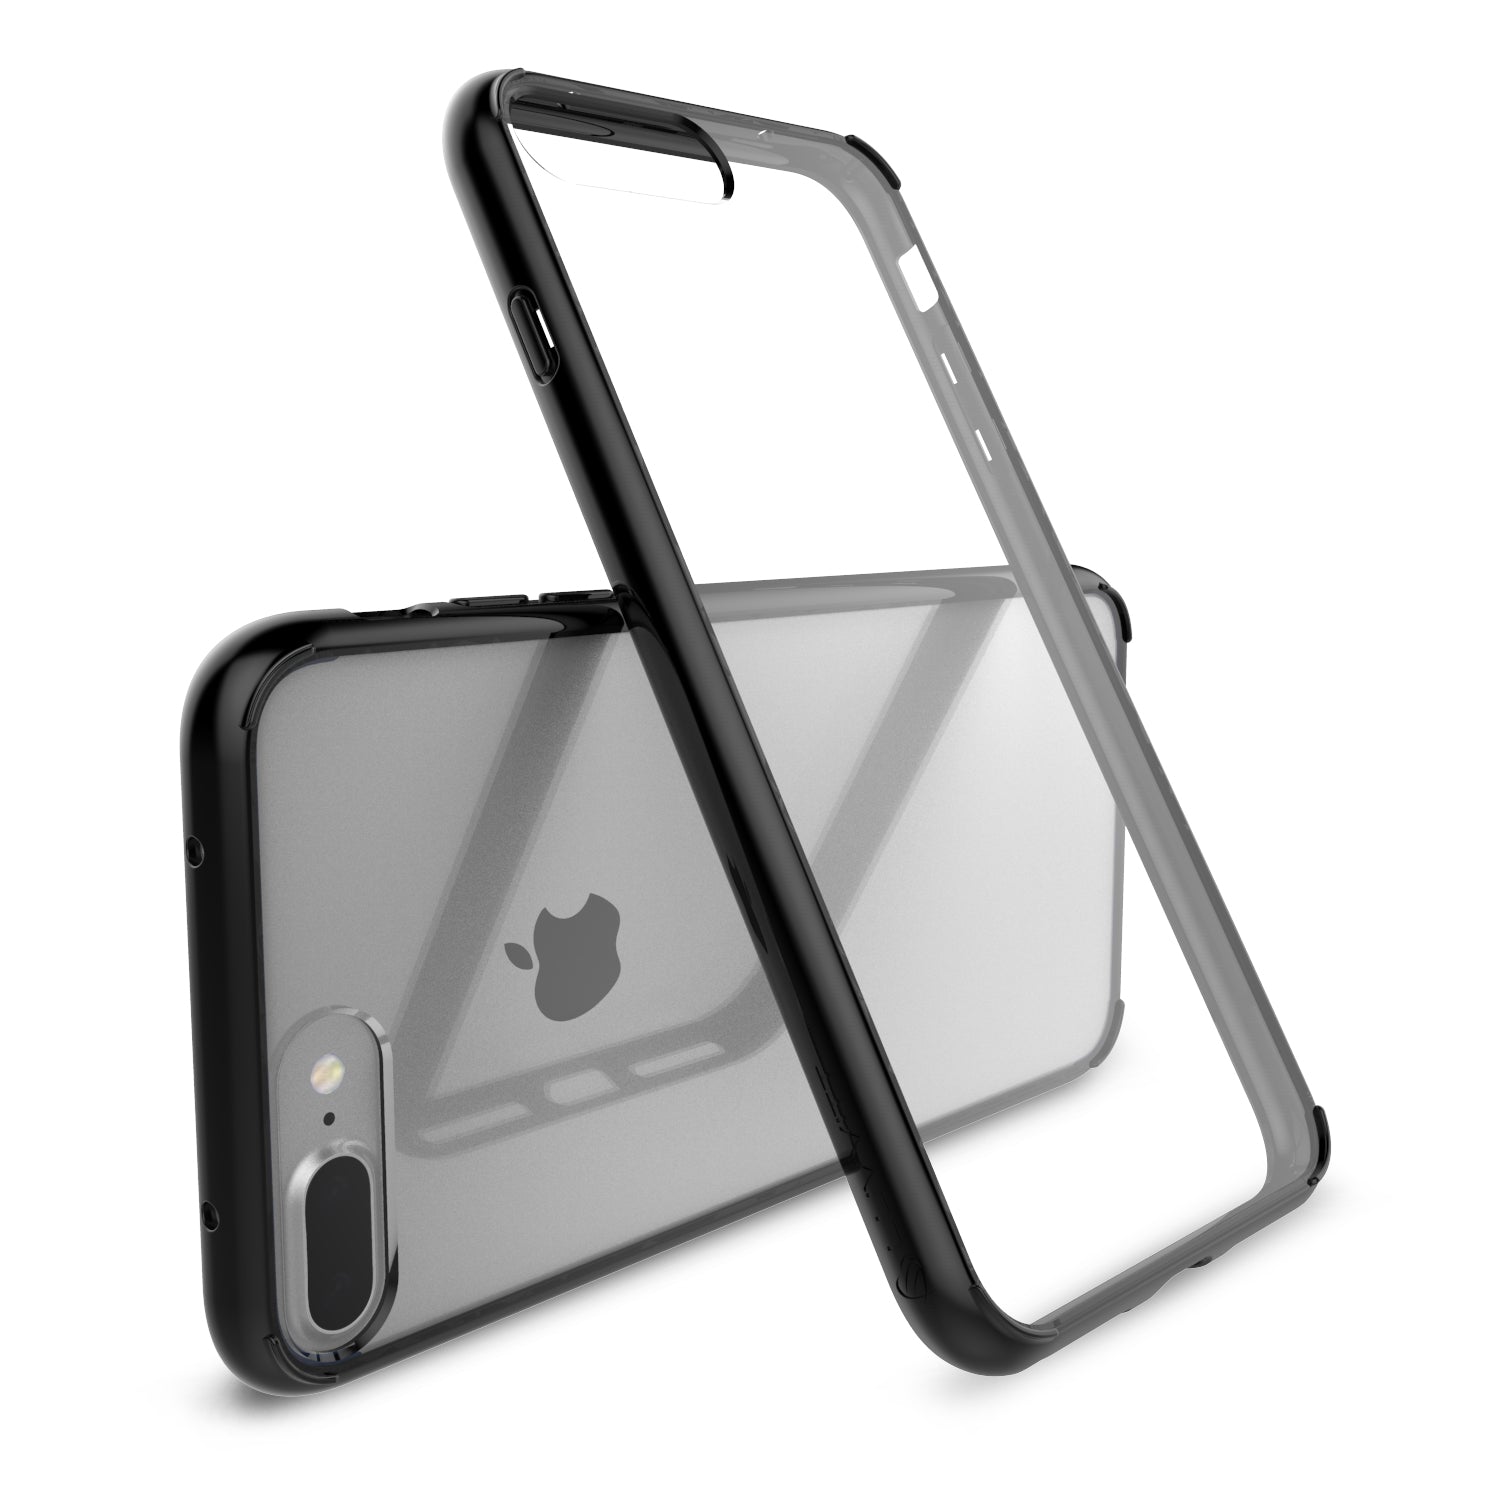 Luvvitt Clear View Hybrid Case for iPhone 8 Plus - Black